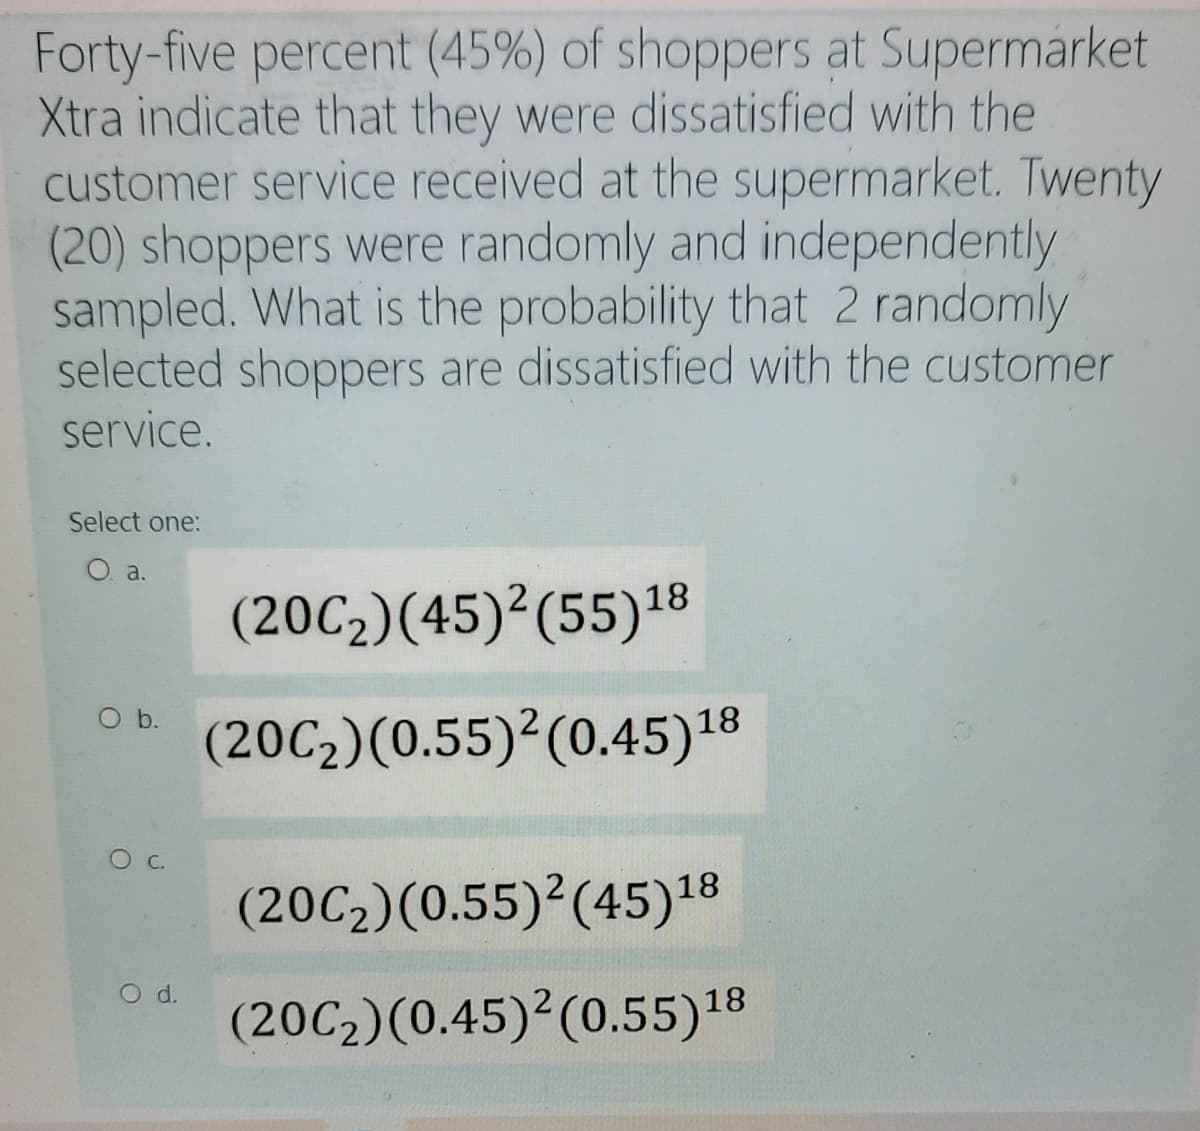 Forty-five percent (45%) of shoppers at Supermarket
Xtra indicate that they were dissatisfied with the
customer service received at the supermarket. Twenty
(20) shoppers were randomly and independently
sampled. What is the probability that 2 randomly
selected shoppers are dissatisfied with the customer
service.
Select one:
O. a.
(20C2)(45)²(55)18
(20C2)(0.55)²(0.45)18
(20C2)(0.55)²(45)18
O d.
(20C2)(0.45)²(0.55)18
